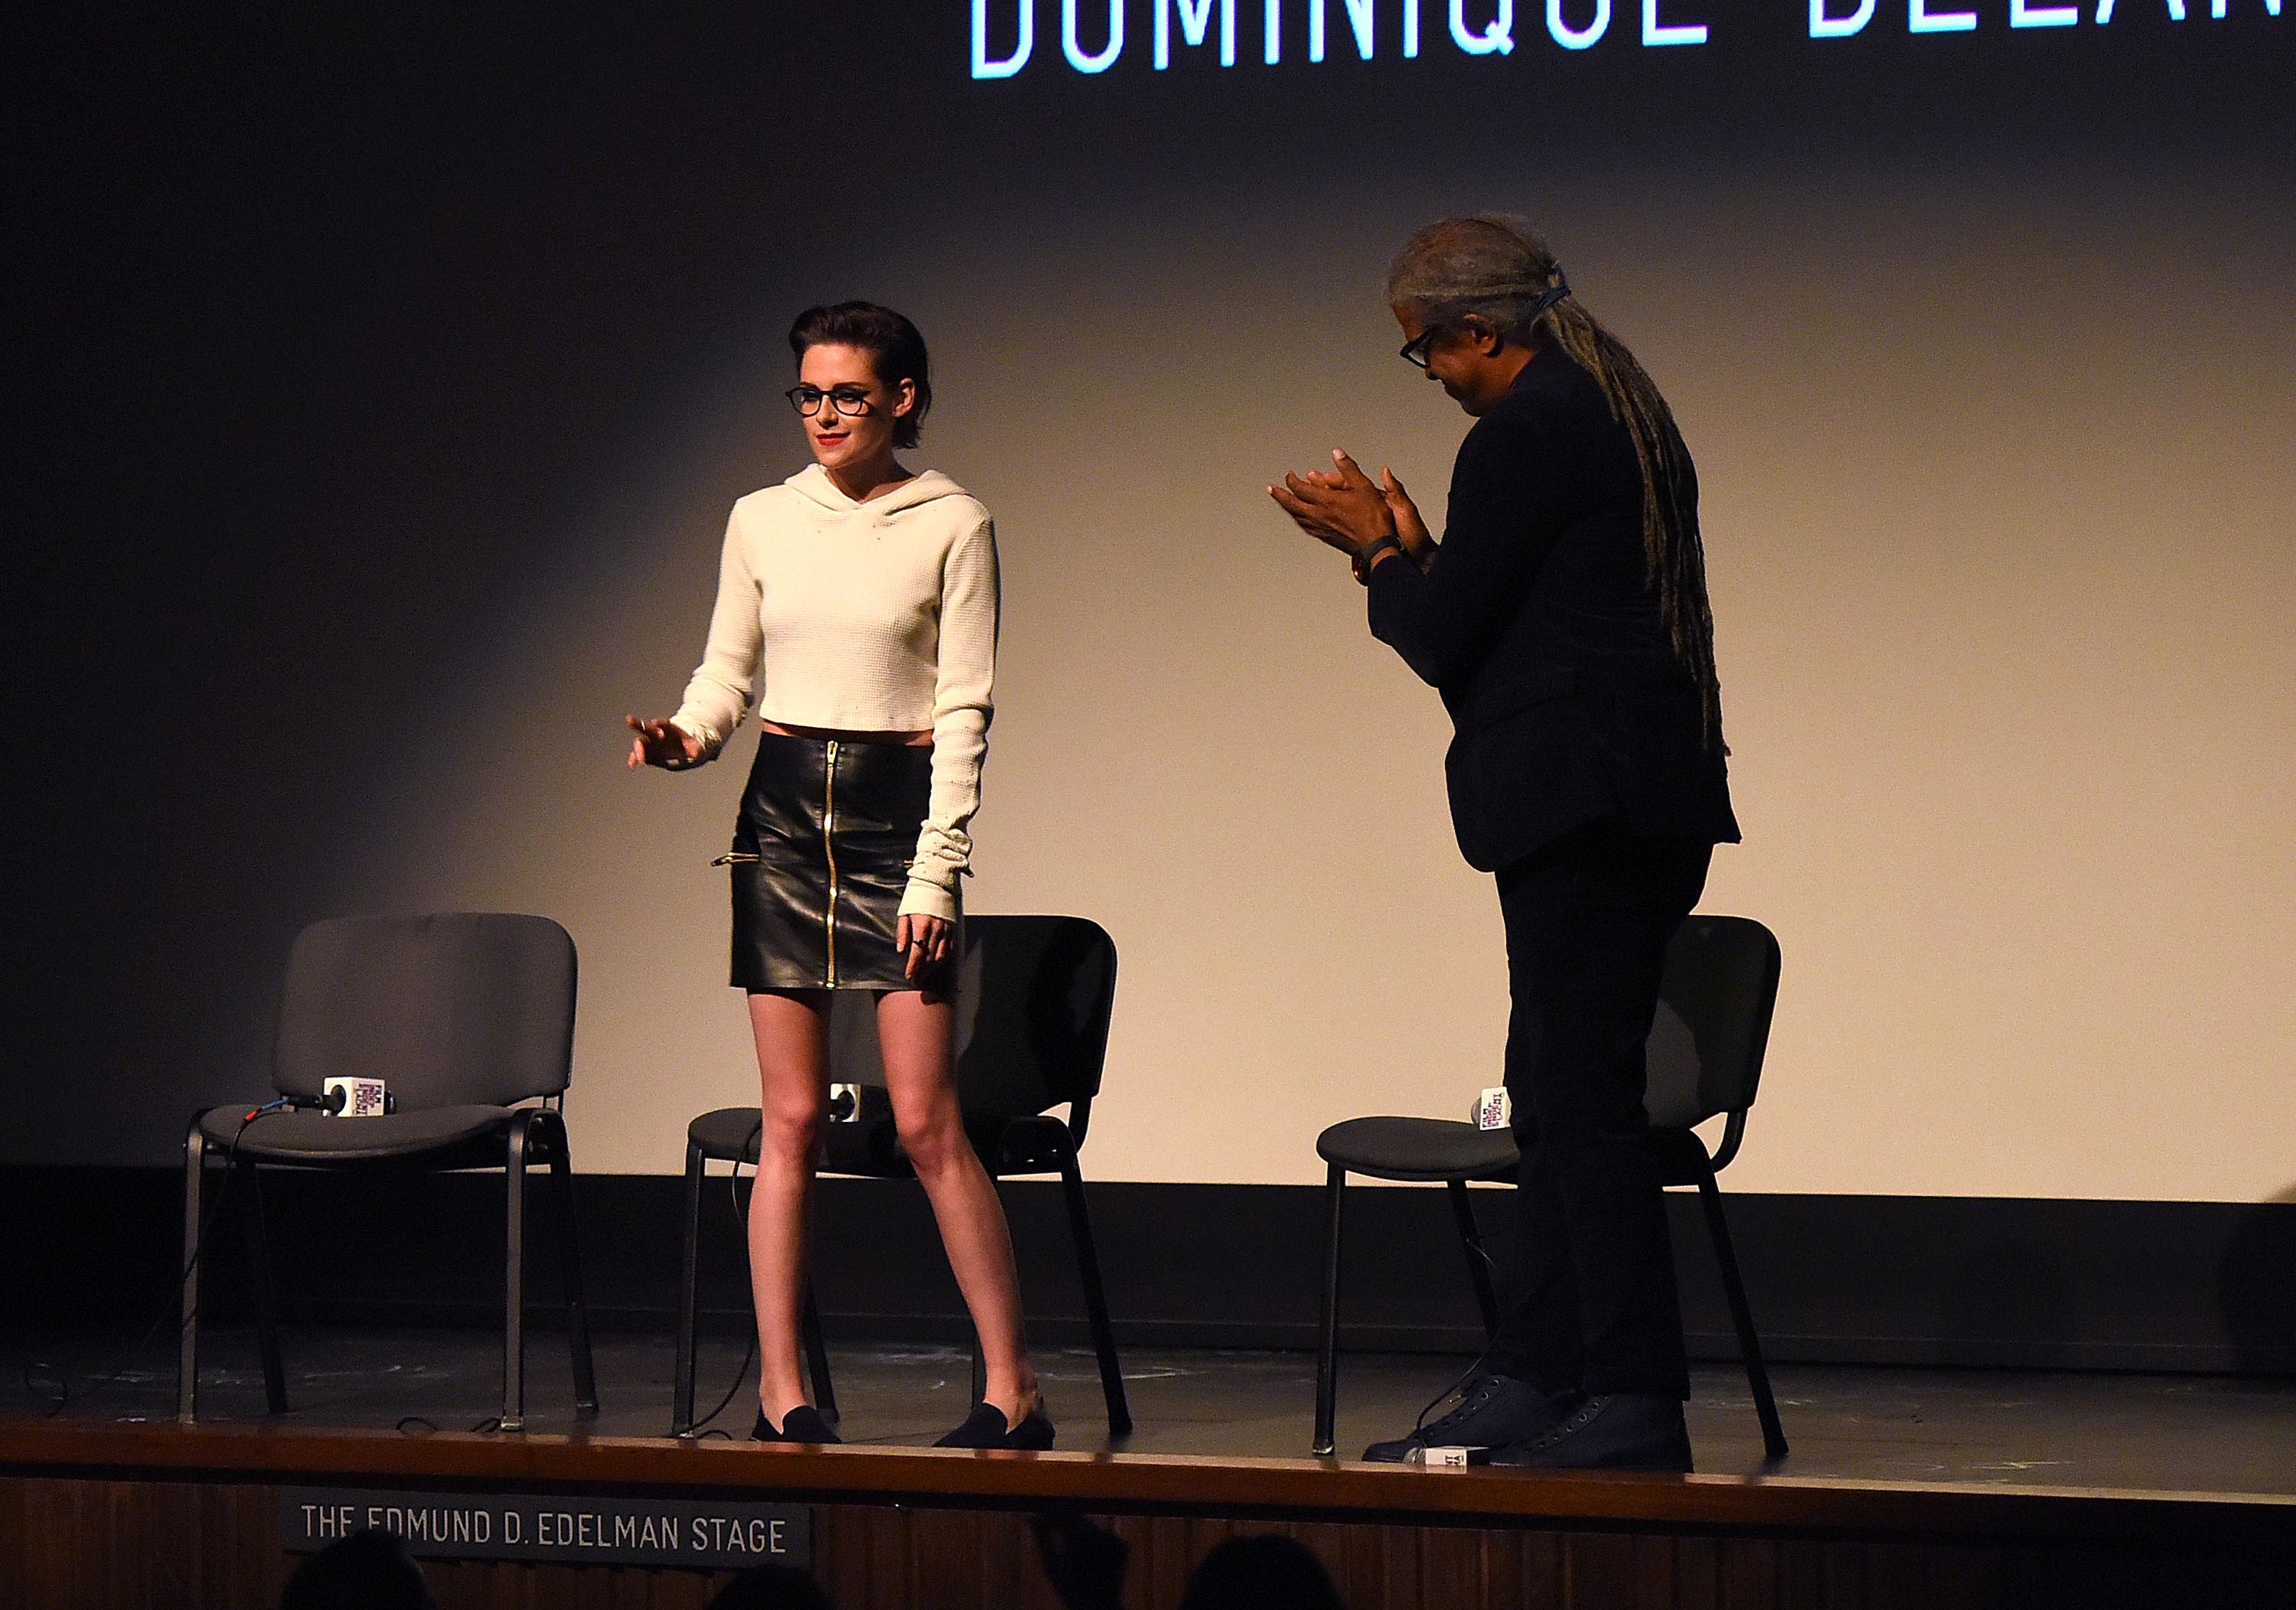 Kristen Stewart attends the Film Independent at LACMA screening